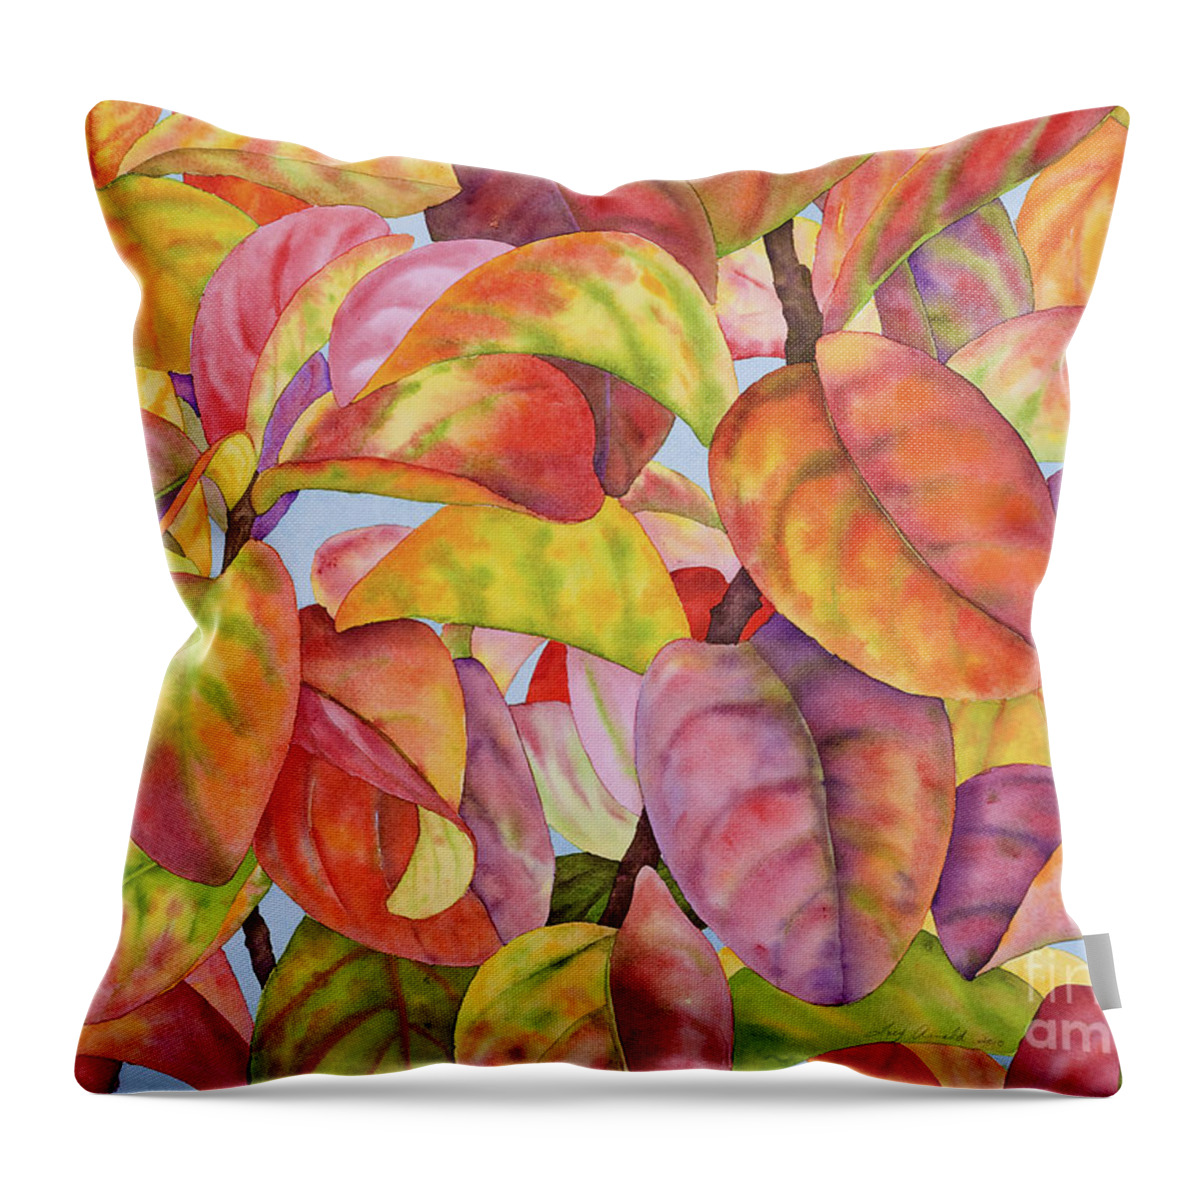 Autumn Leaves Throw Pillow featuring the painting Autumn Crepe Myrtle by Lucy Arnold